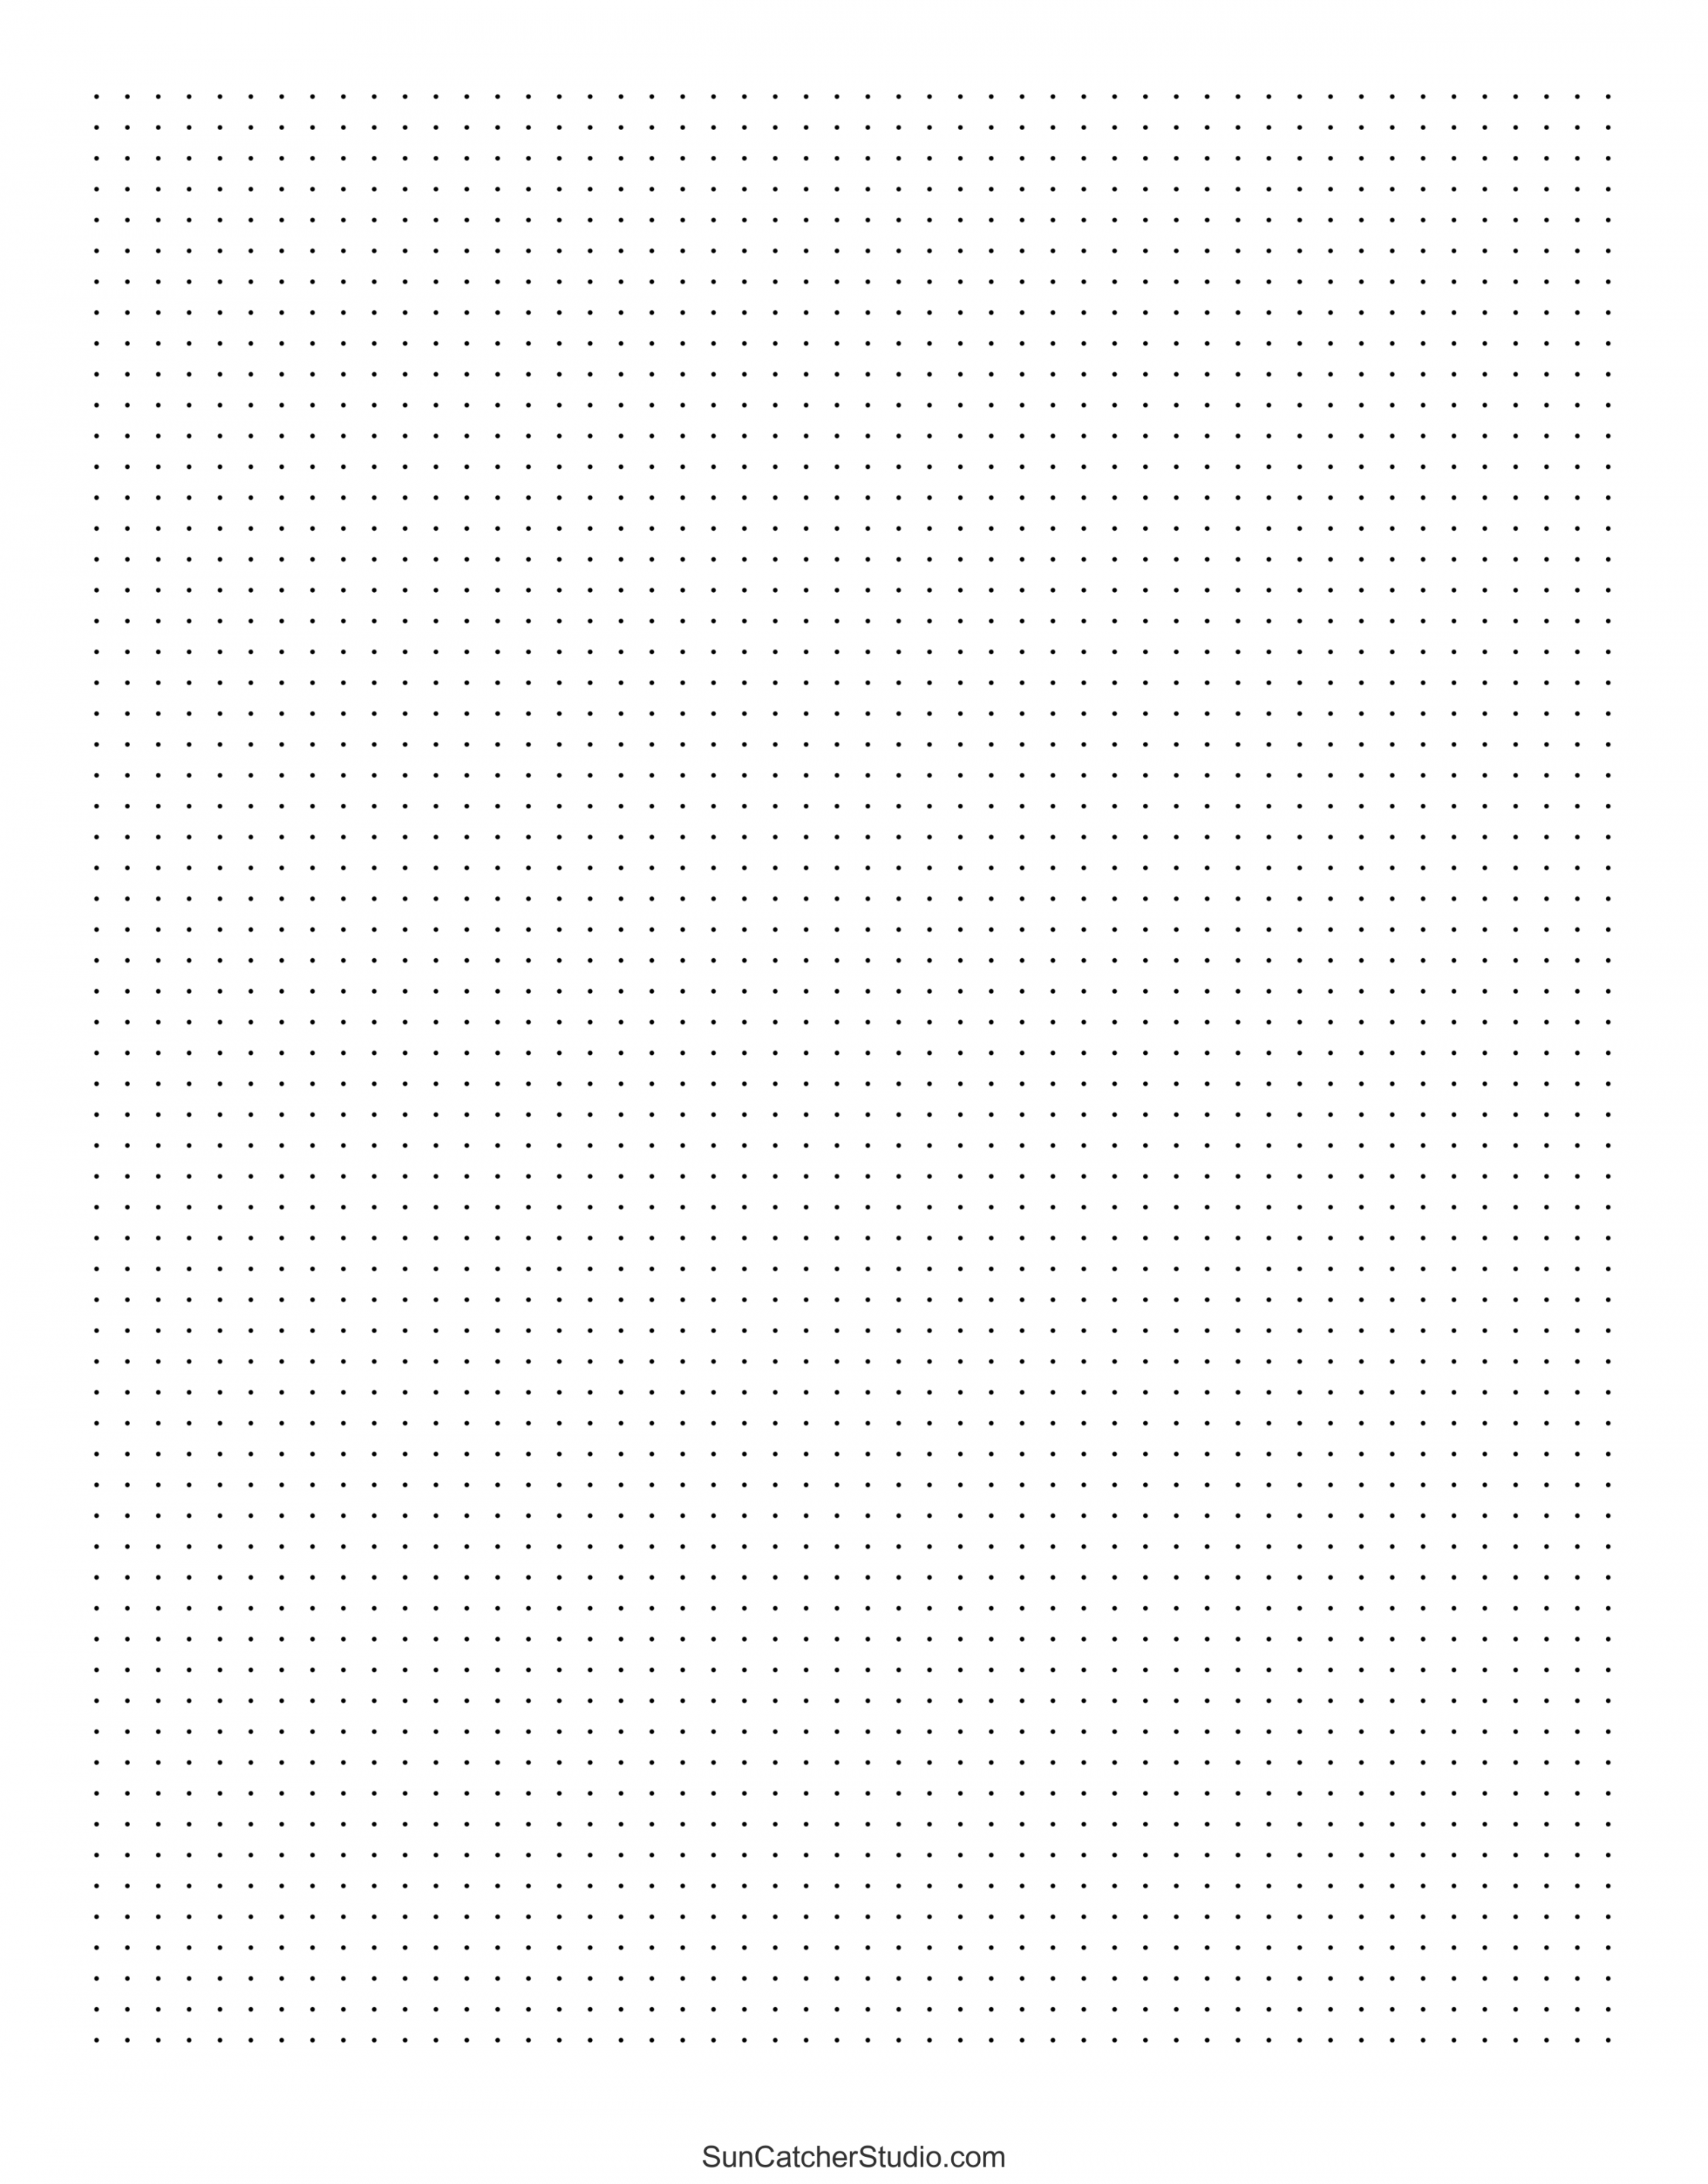 Free Printable Dot Paper: Dotted Grid Sheets (PDF & PNG) – DIY  - FREE Printables - Dot Paper Printable